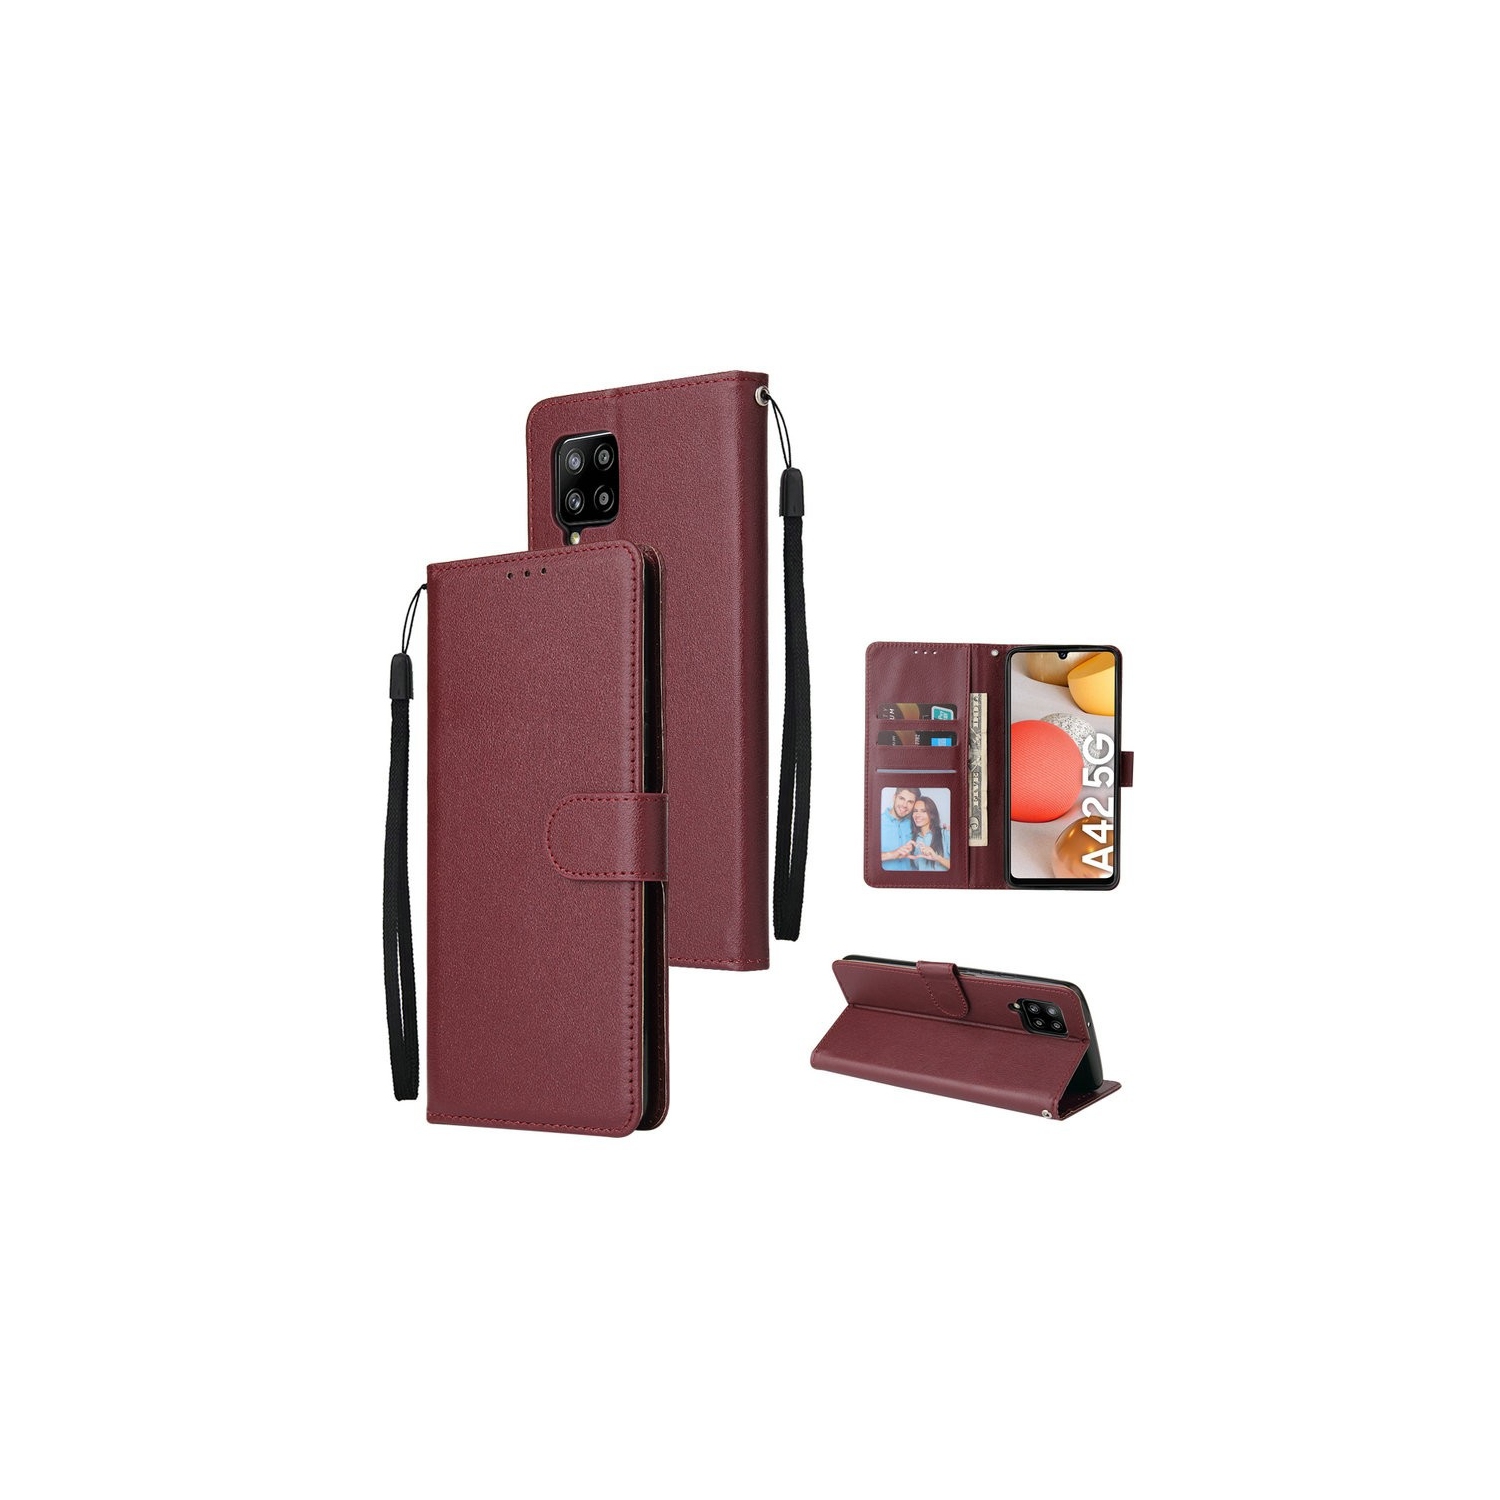 【CSmart】 Magnetic Card Slot Leather Folio Wallet Flip Case Cover for Samsung Galaxy A12 / M12 / F12, Wine